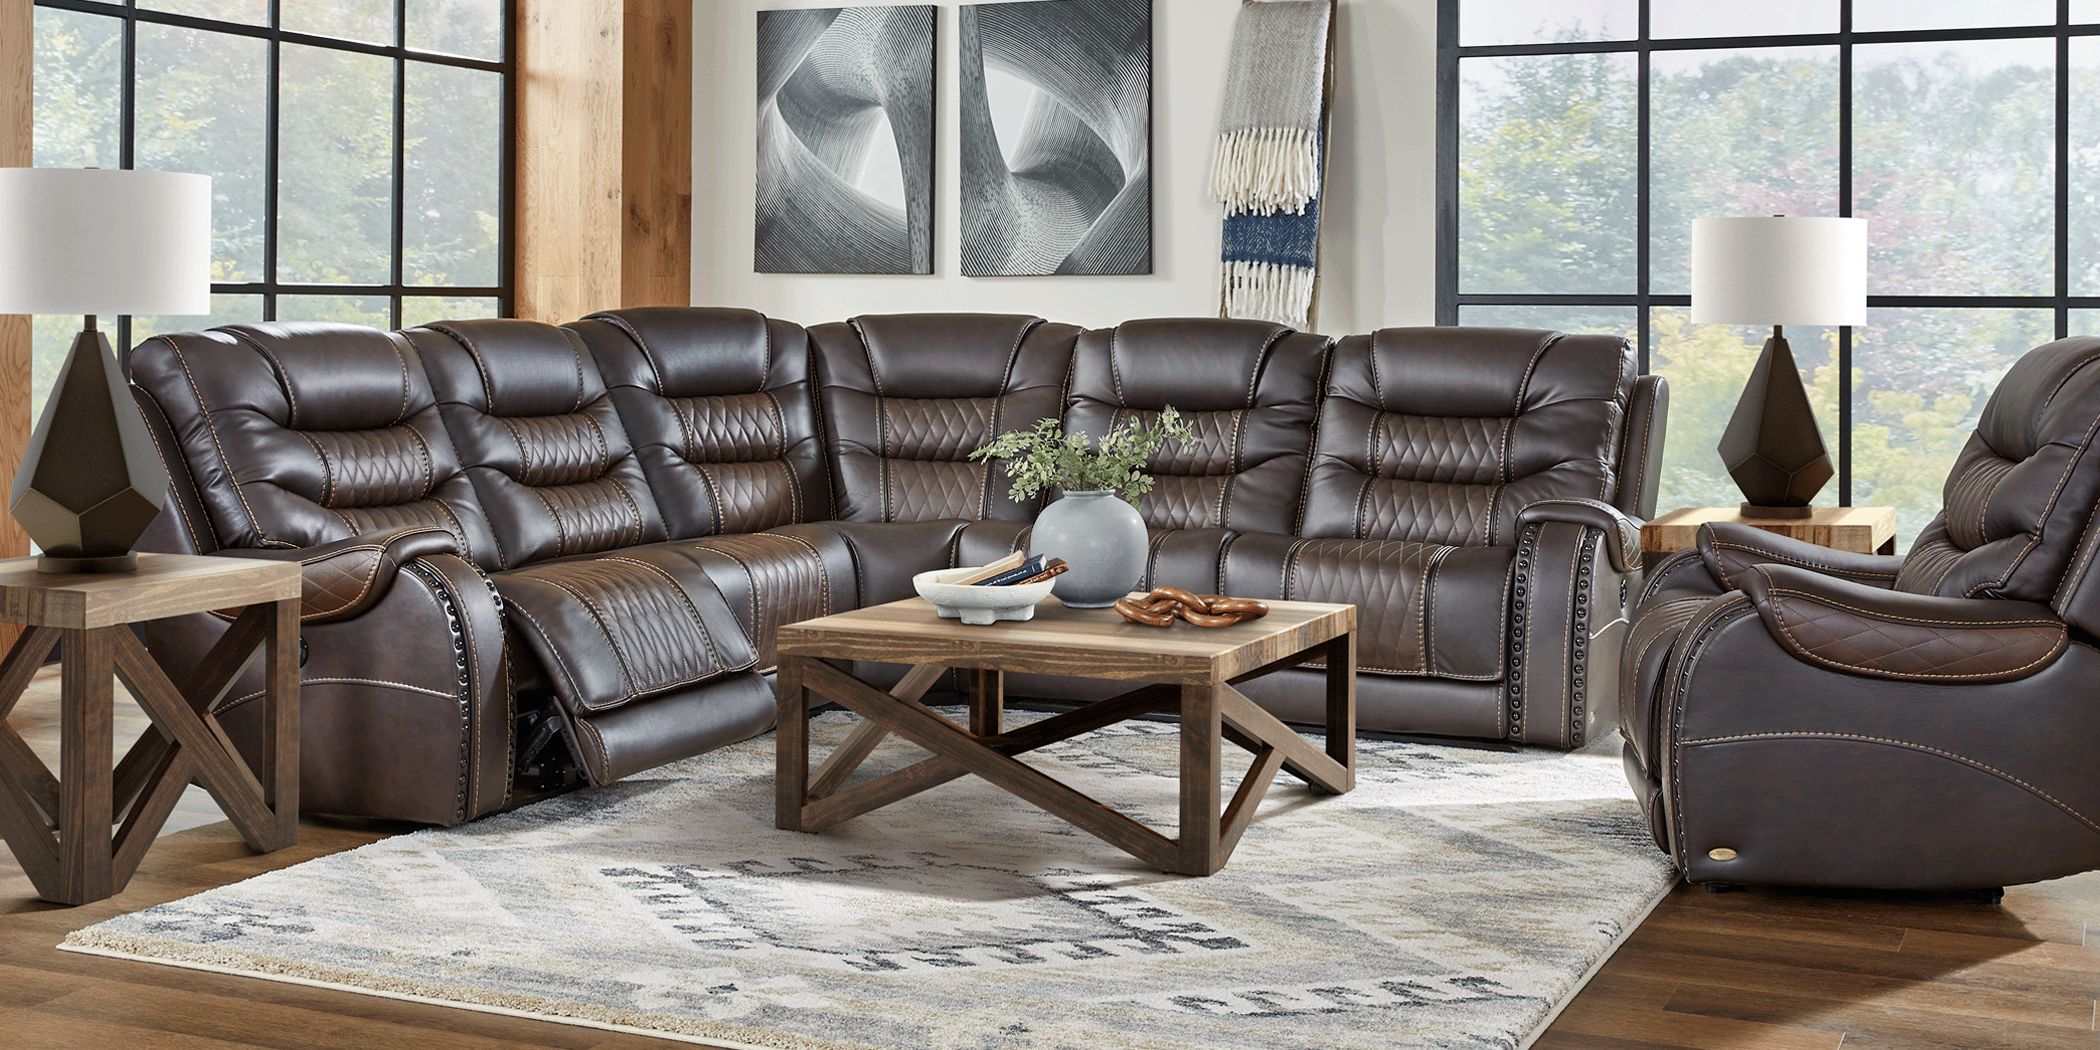 Benzara Bonded Leather 3 Piece Reclining Sectional Brown